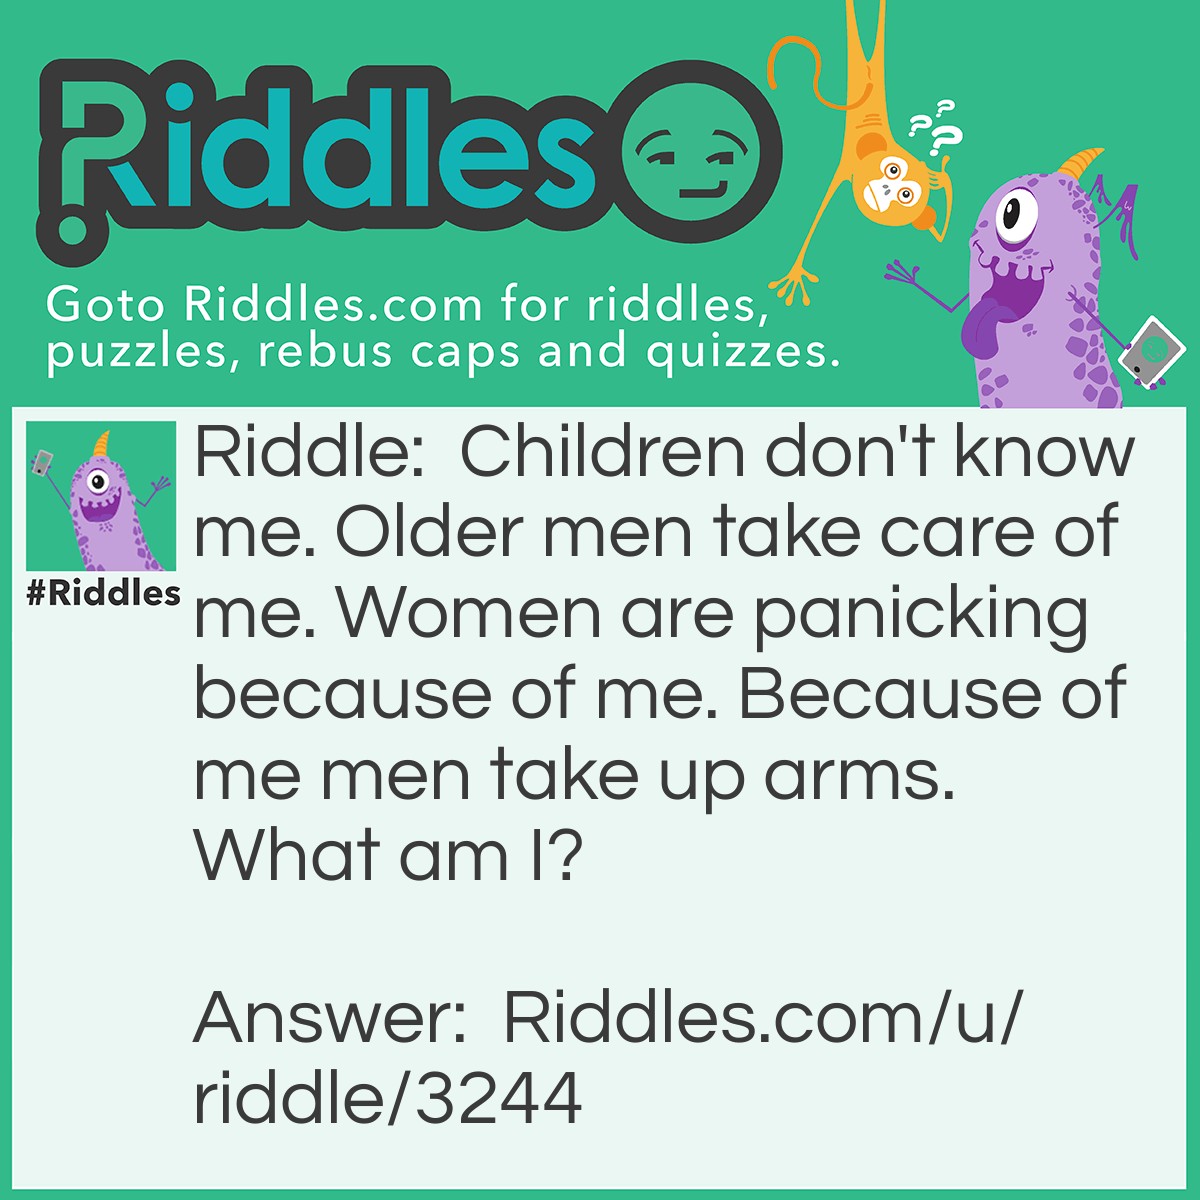 Riddle: Children don't know me. Older men take care of me. Women are panicking because of me. Because of me men take up arms. What am I? Answer: A beard.